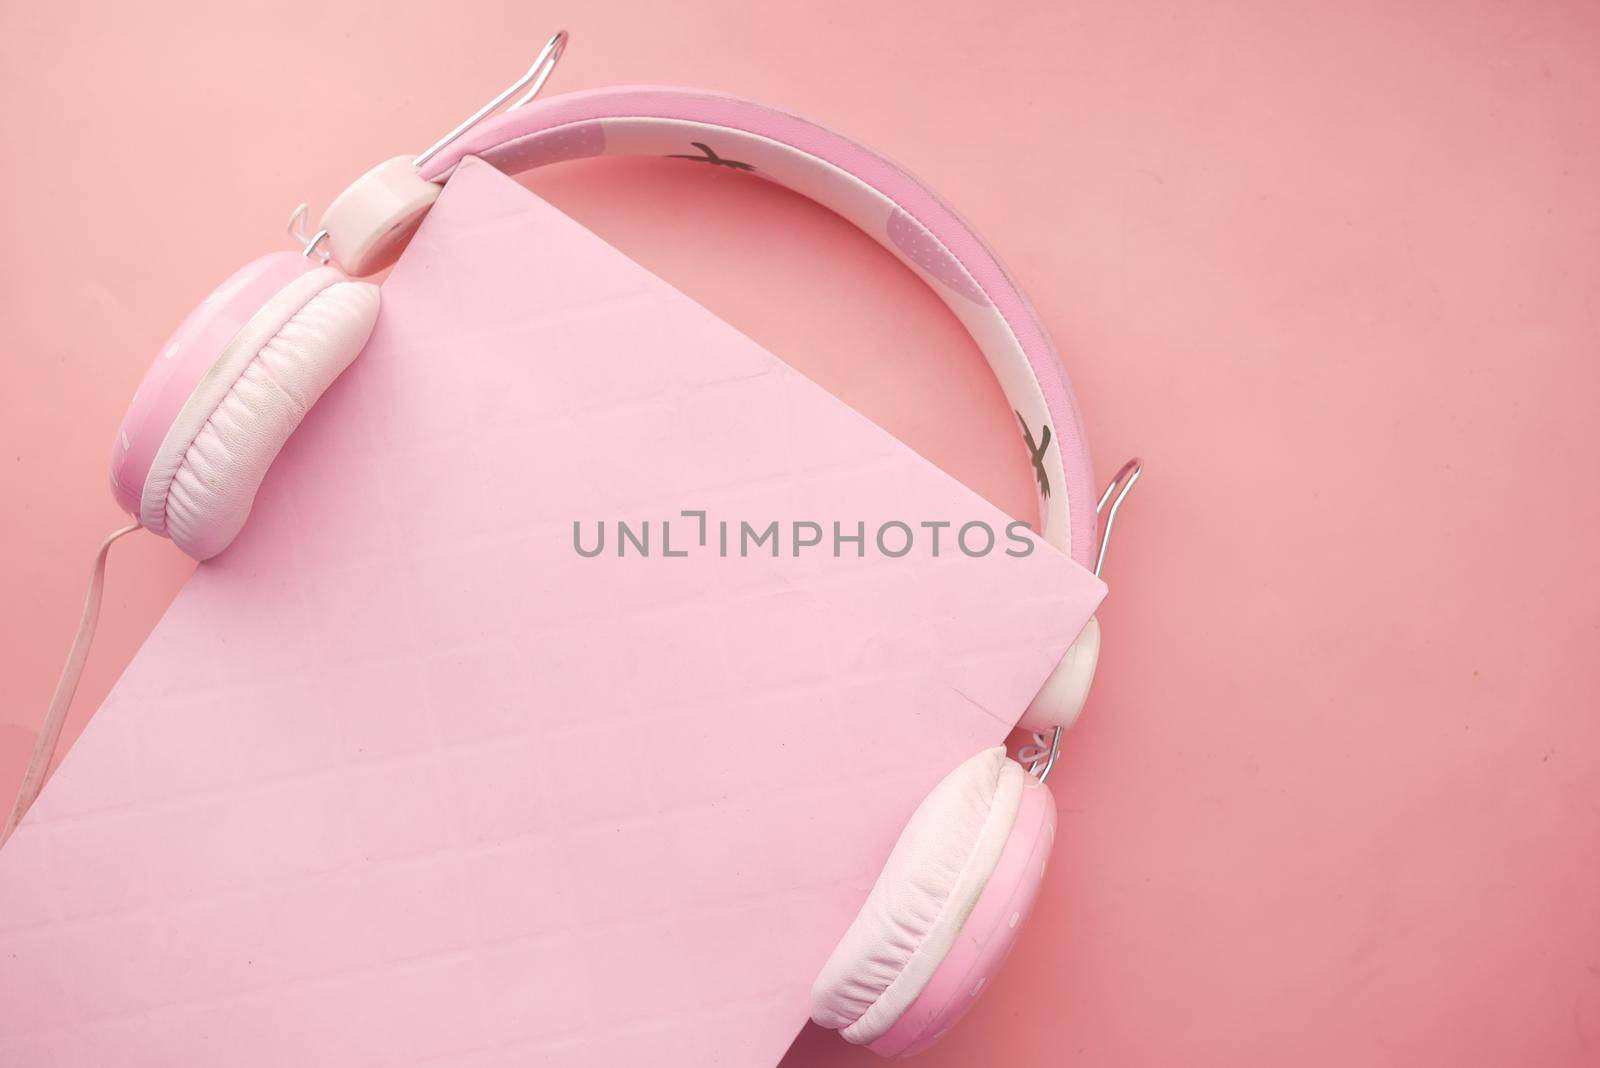 Audio book concept. Headphones and book on pink background